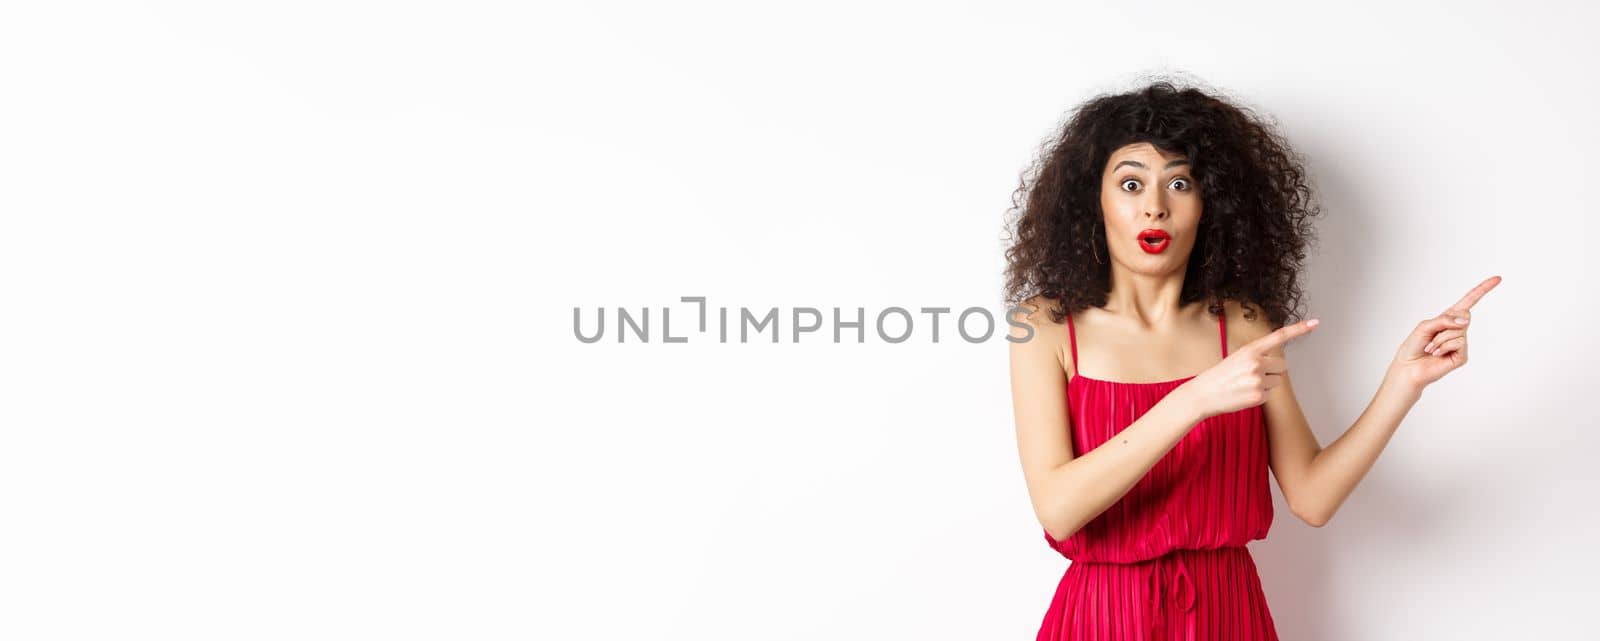 Surprised woman in red dress and makeup pointing fingers right, showing logo and look intrigued, standing on white background.